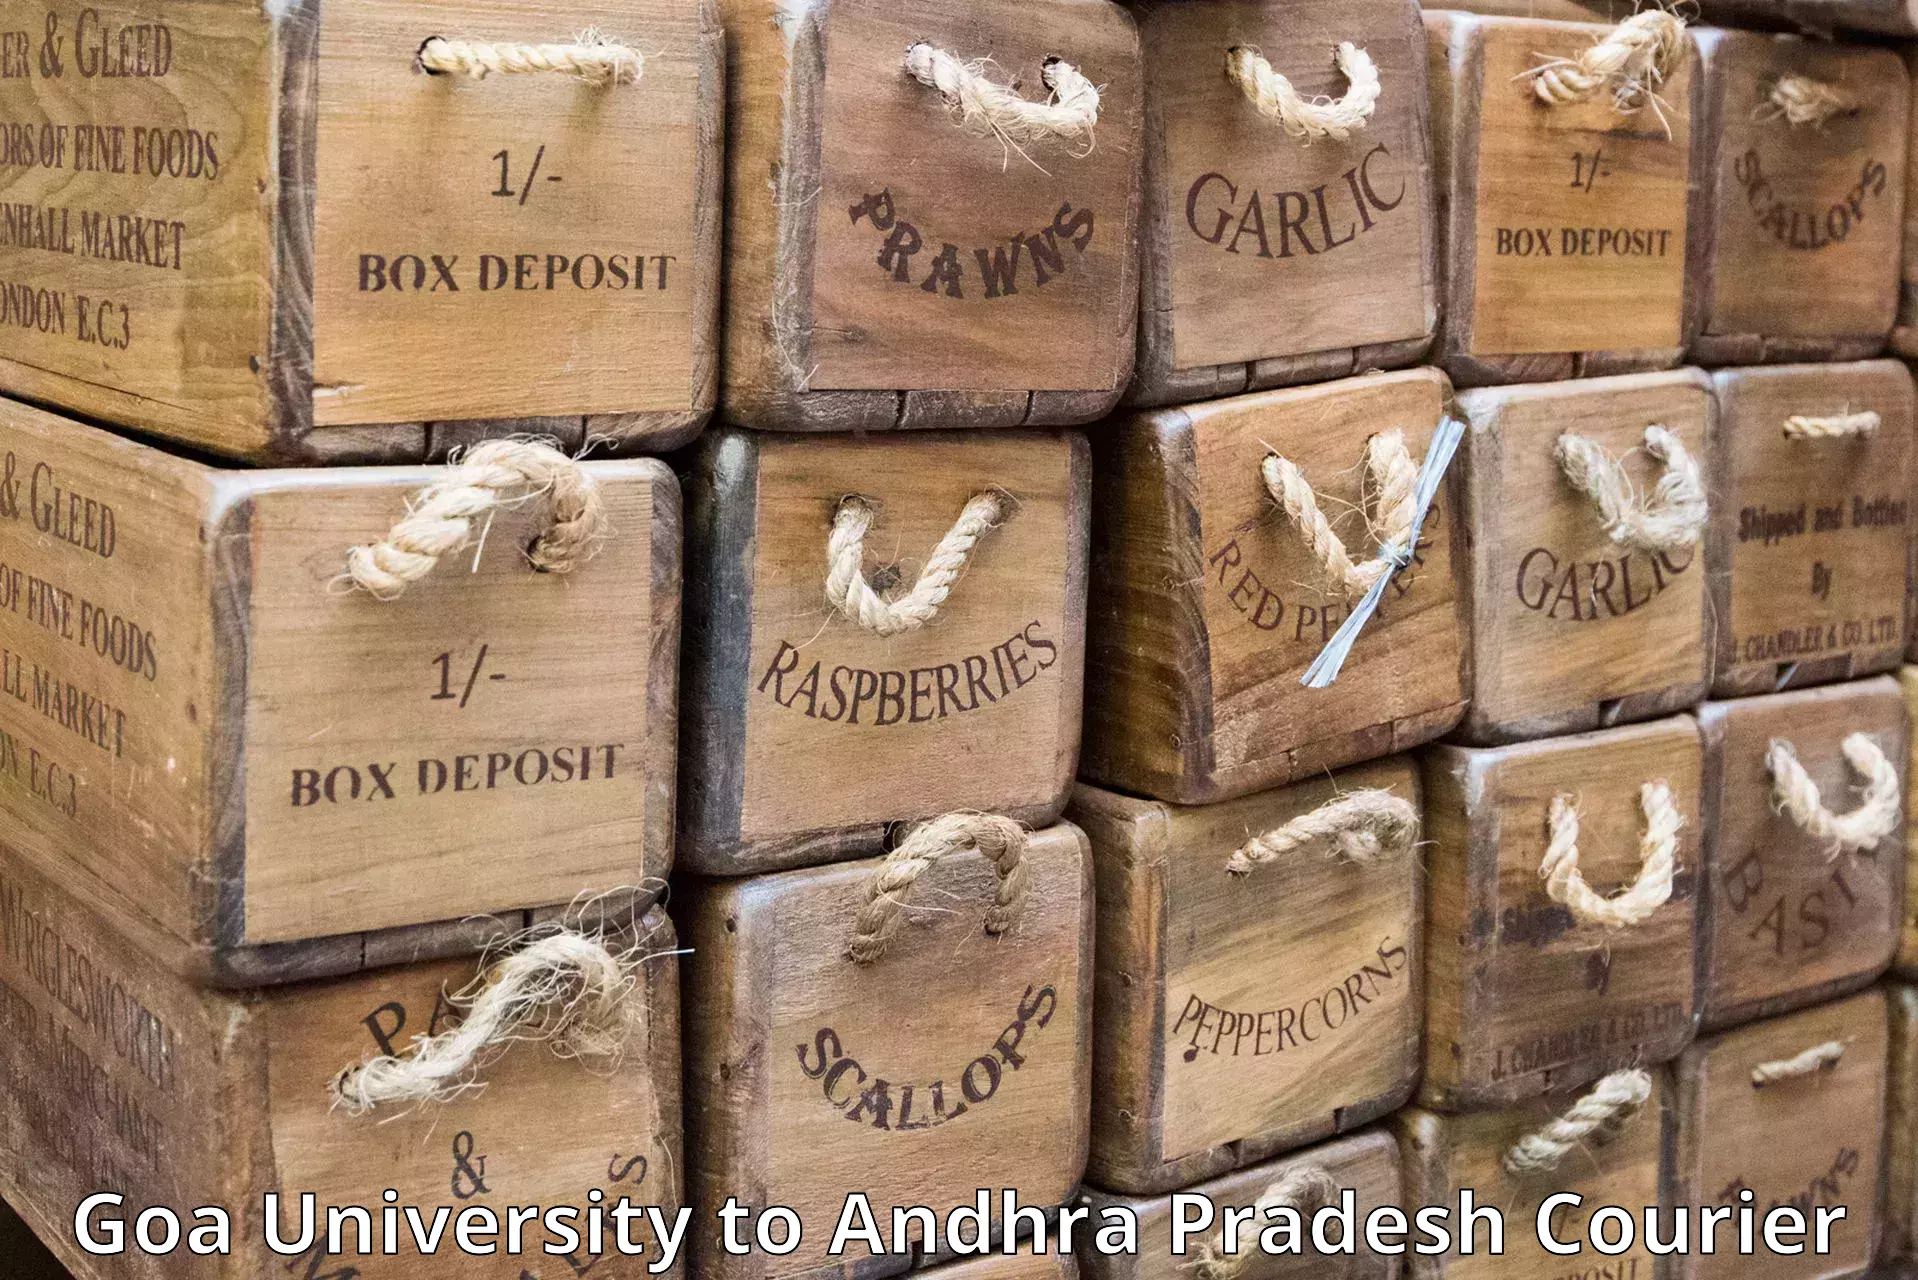 Special handling courier in Goa University to Podalakur